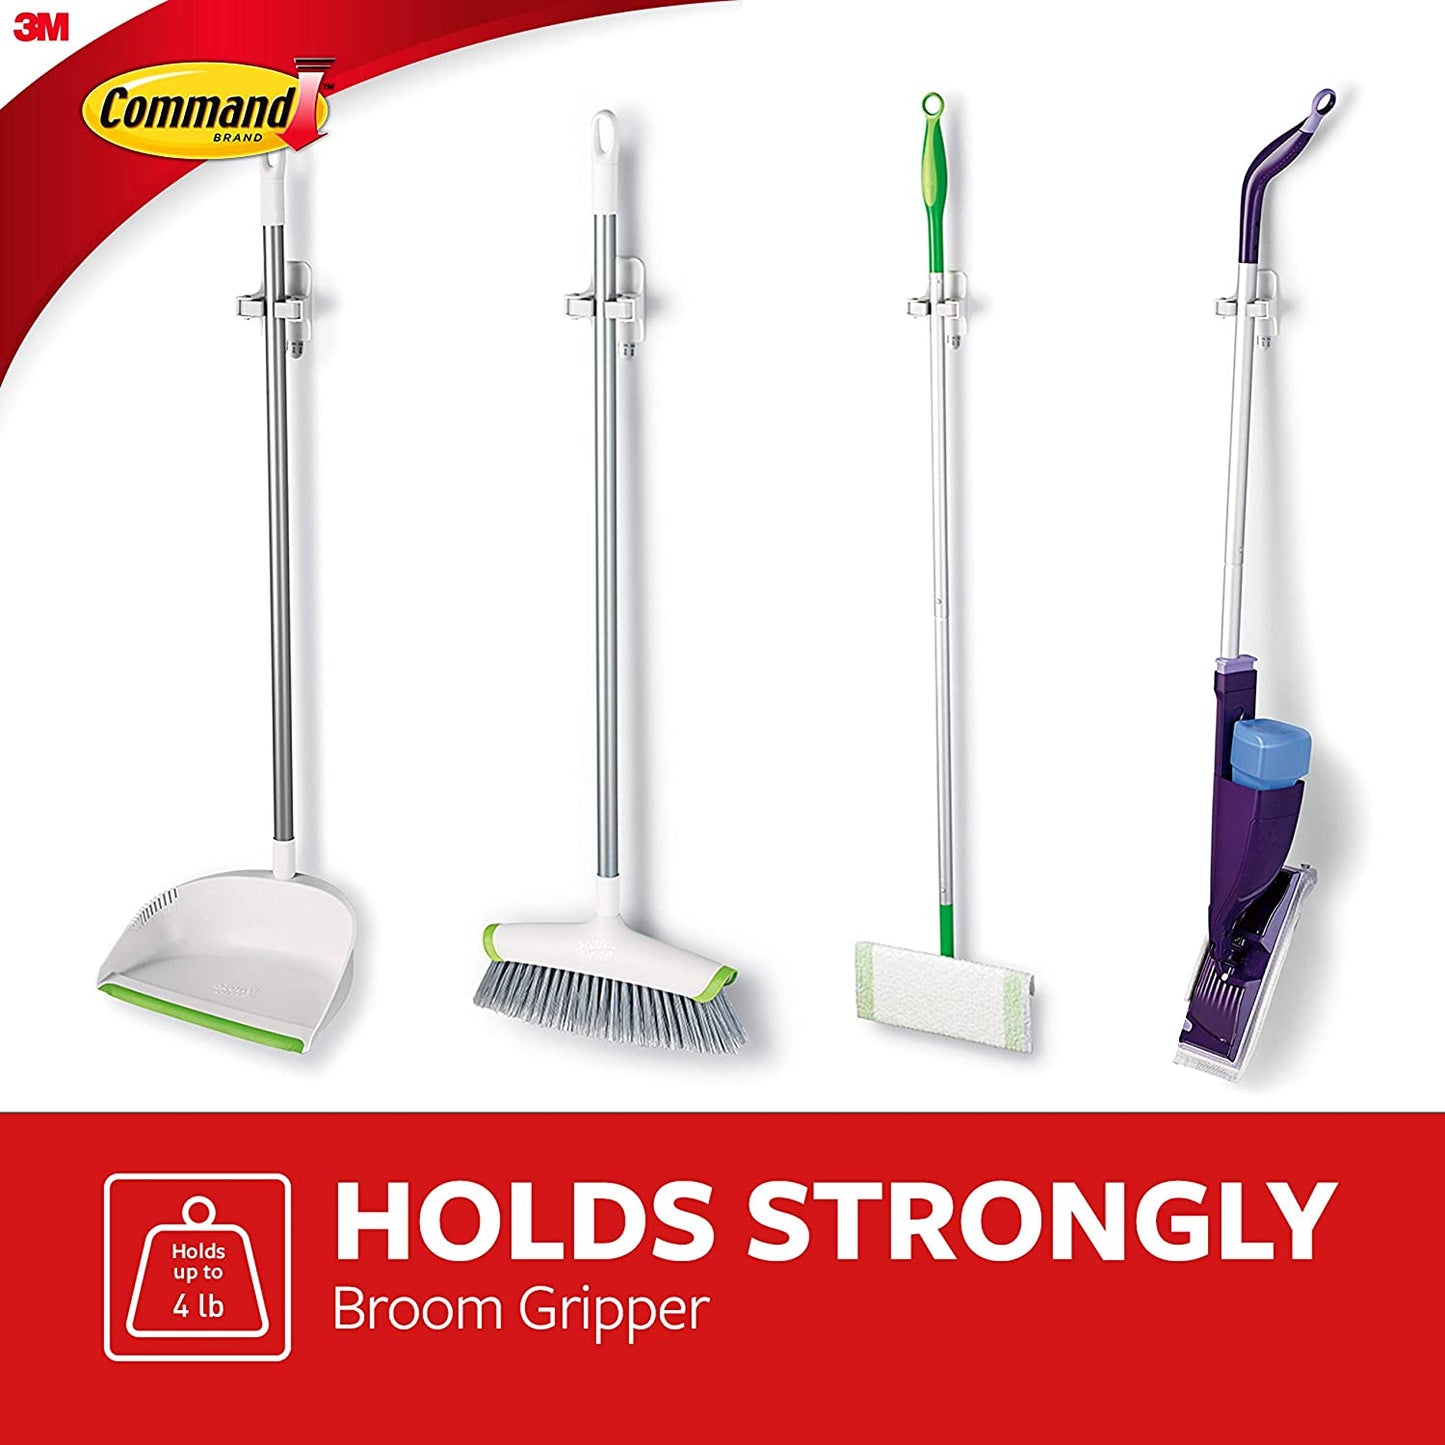 Command White Broom Gripper, Holds up to 4 lbs Damage-Free Hanging Easy to Apply